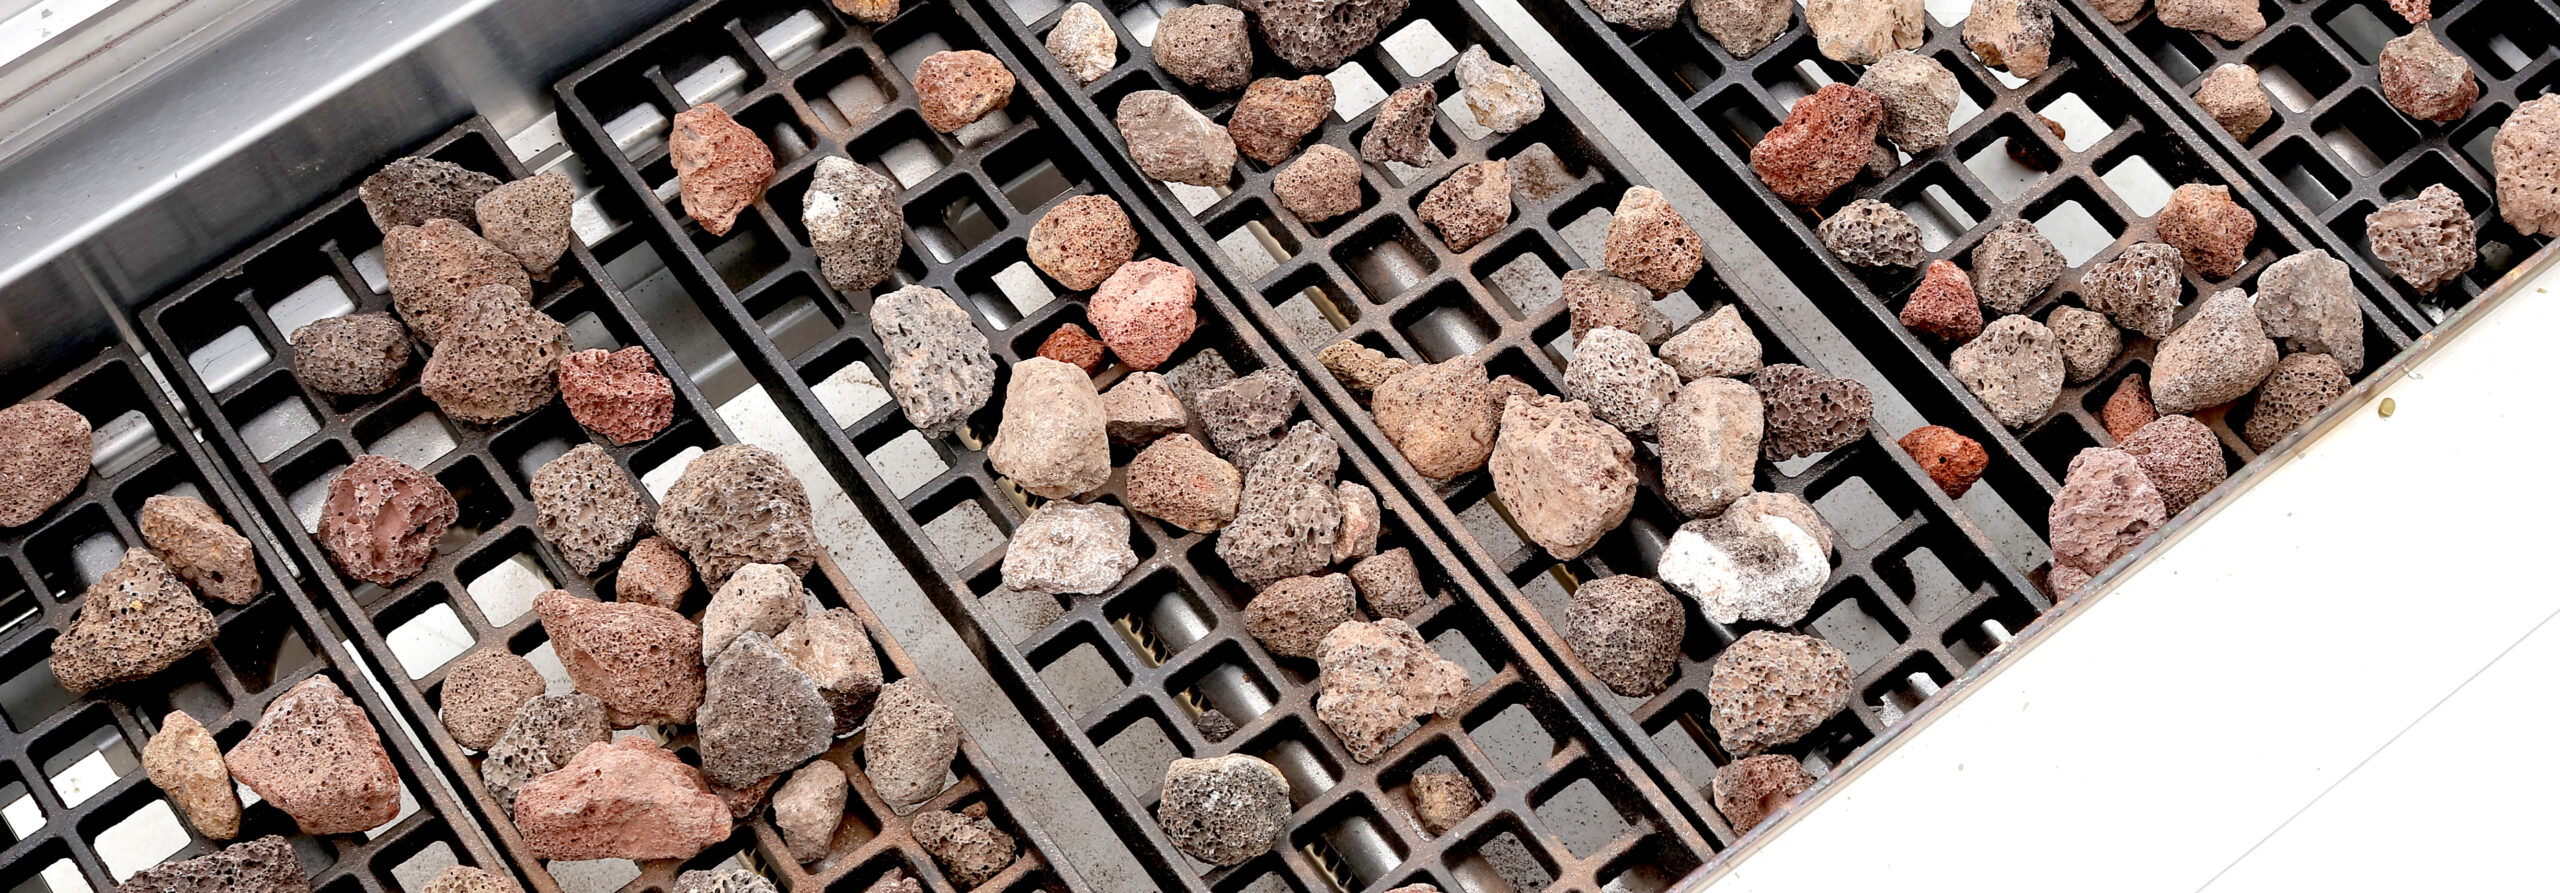 Lava rocks on Atosa commercial grill